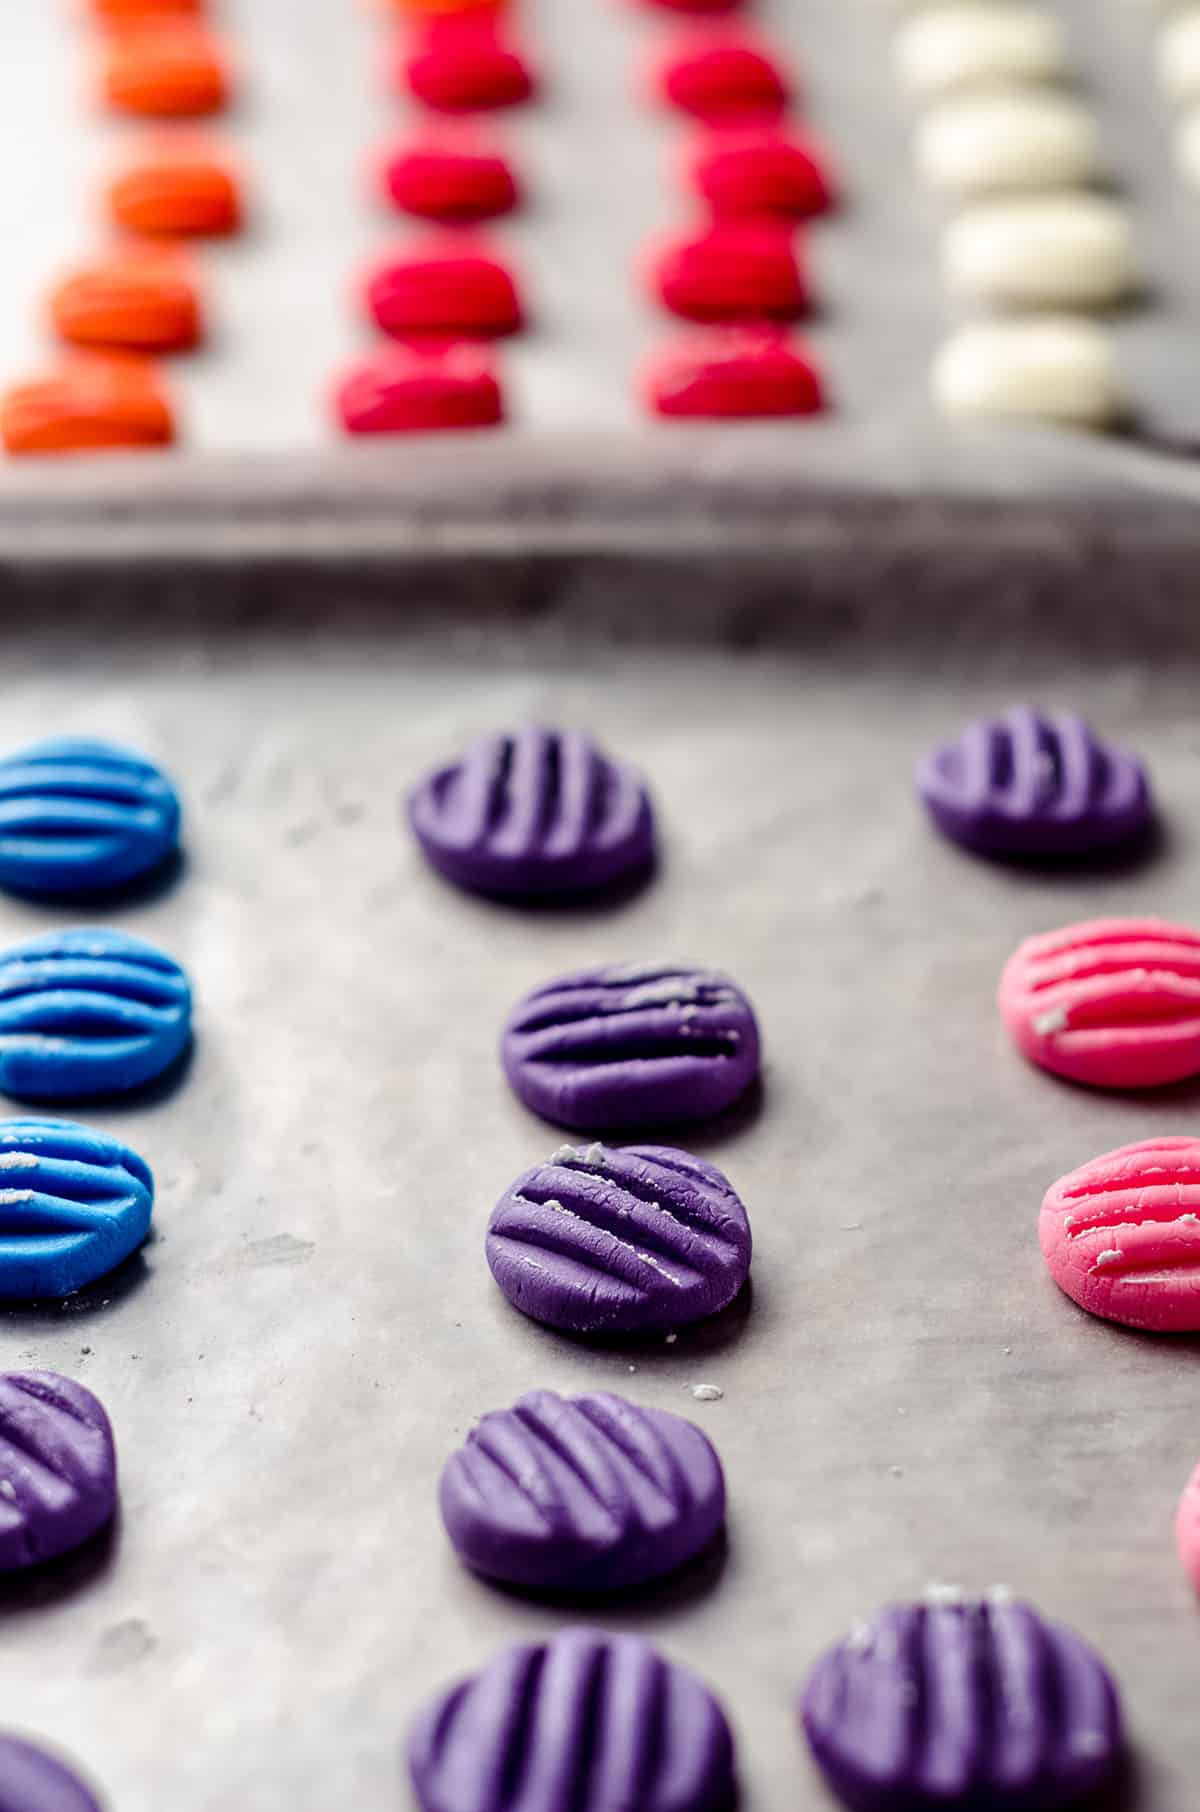 Baking sheets filled with colorful mint candies.